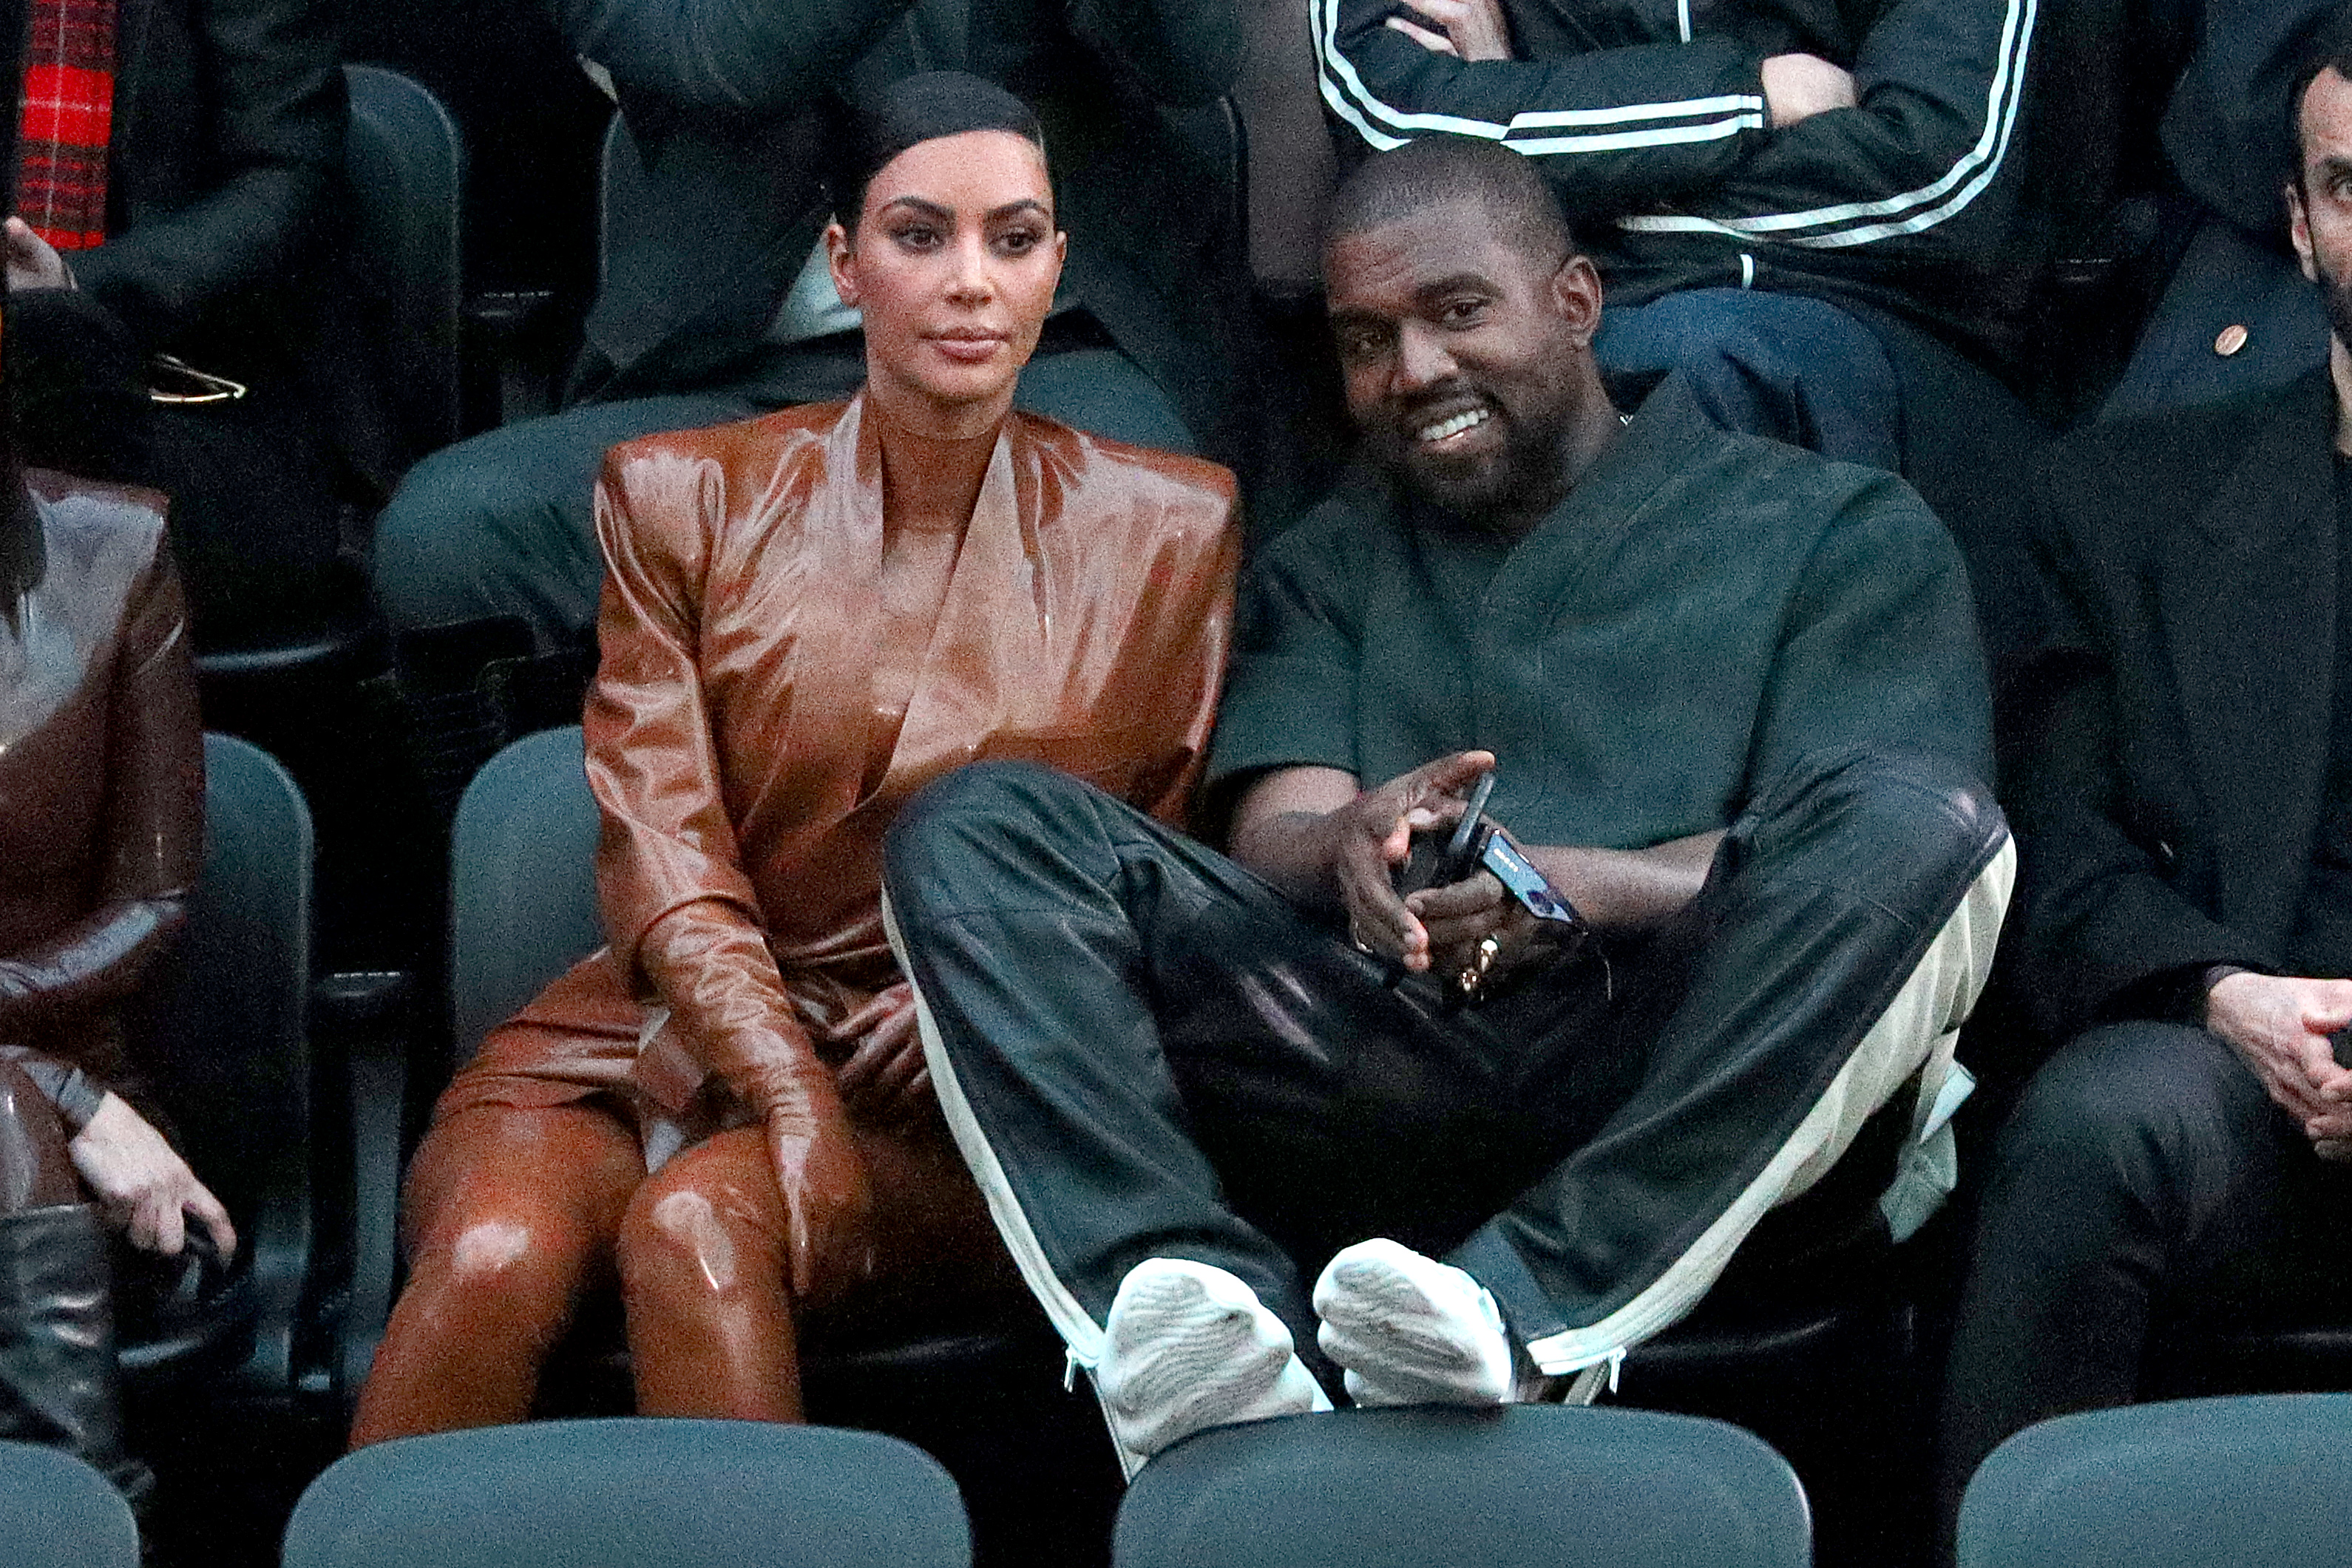 Kim and Kanye's parenting of their children has frequently faced criticism